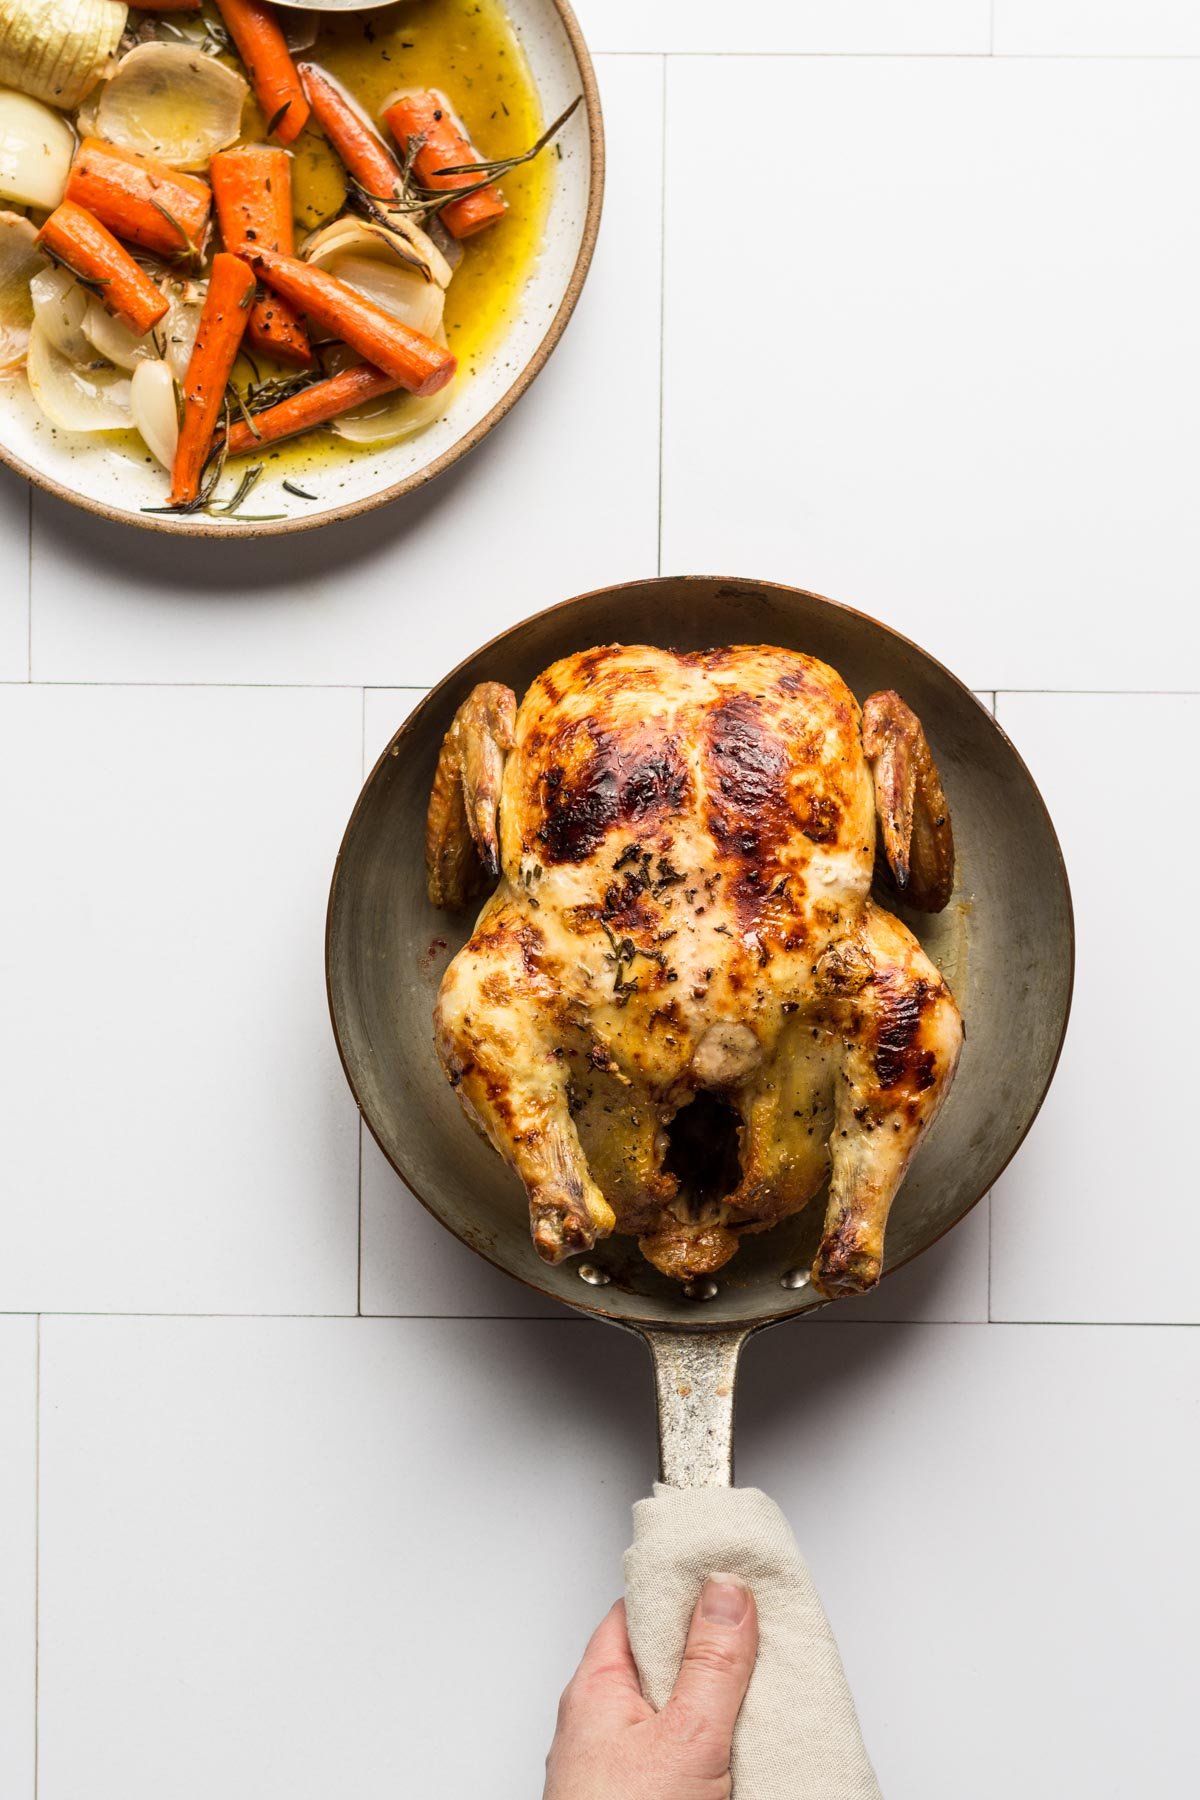 A whole chicken with vegetables in a pan